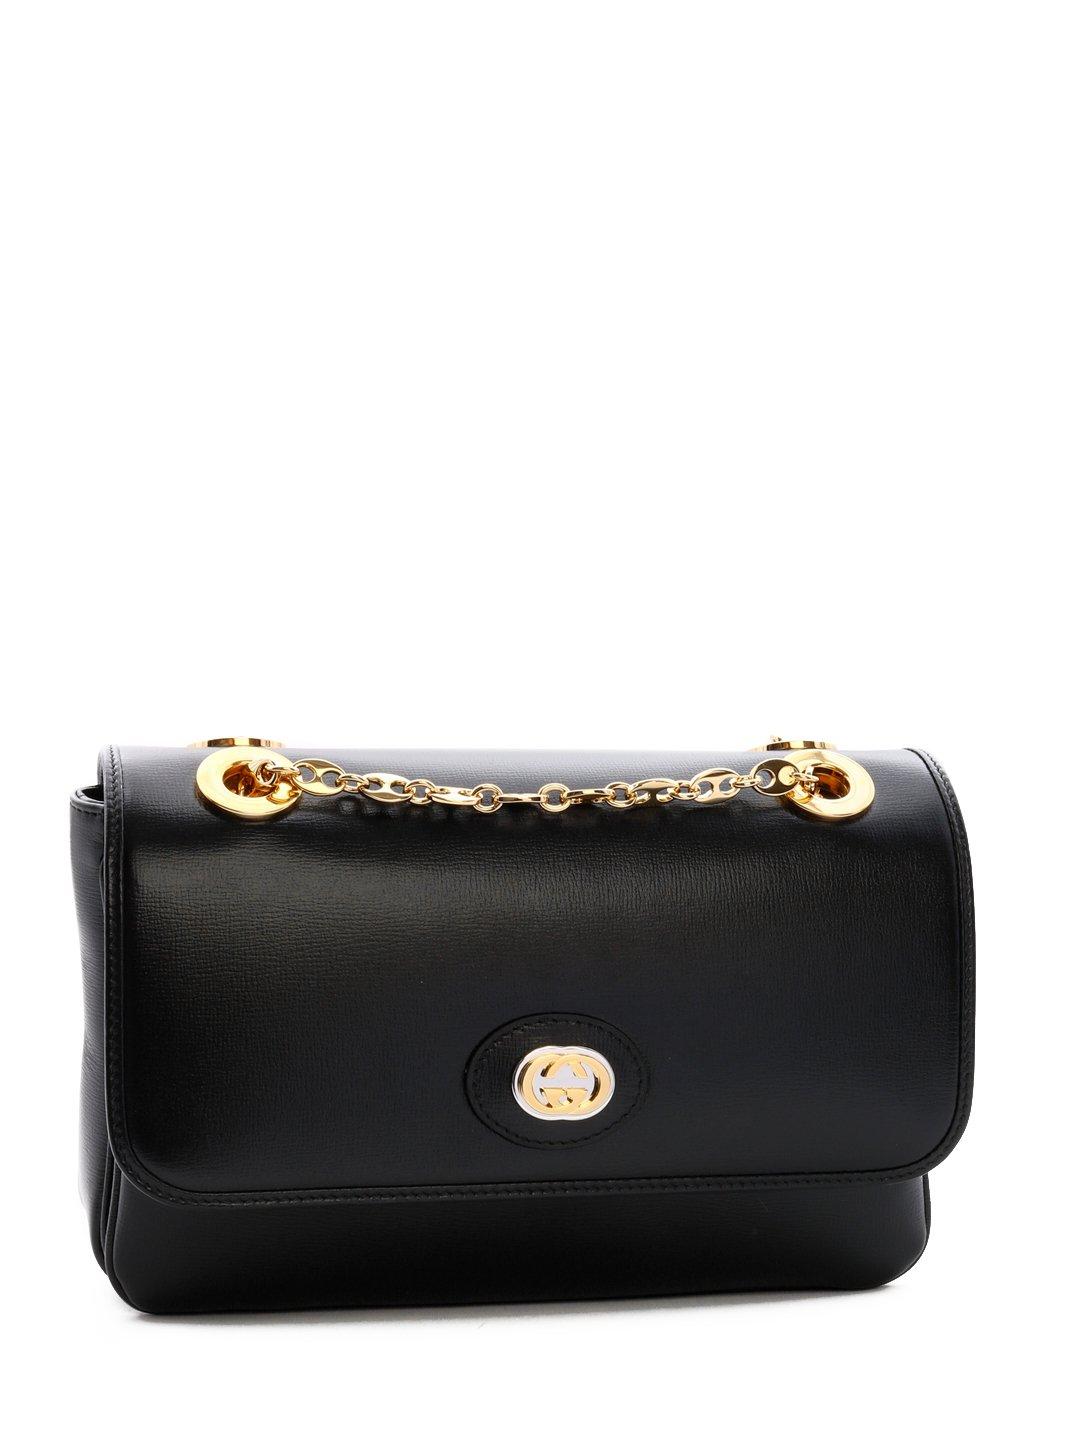 Gucci Leather Small Logo Chain Shoulder Bag in Black - Lyst